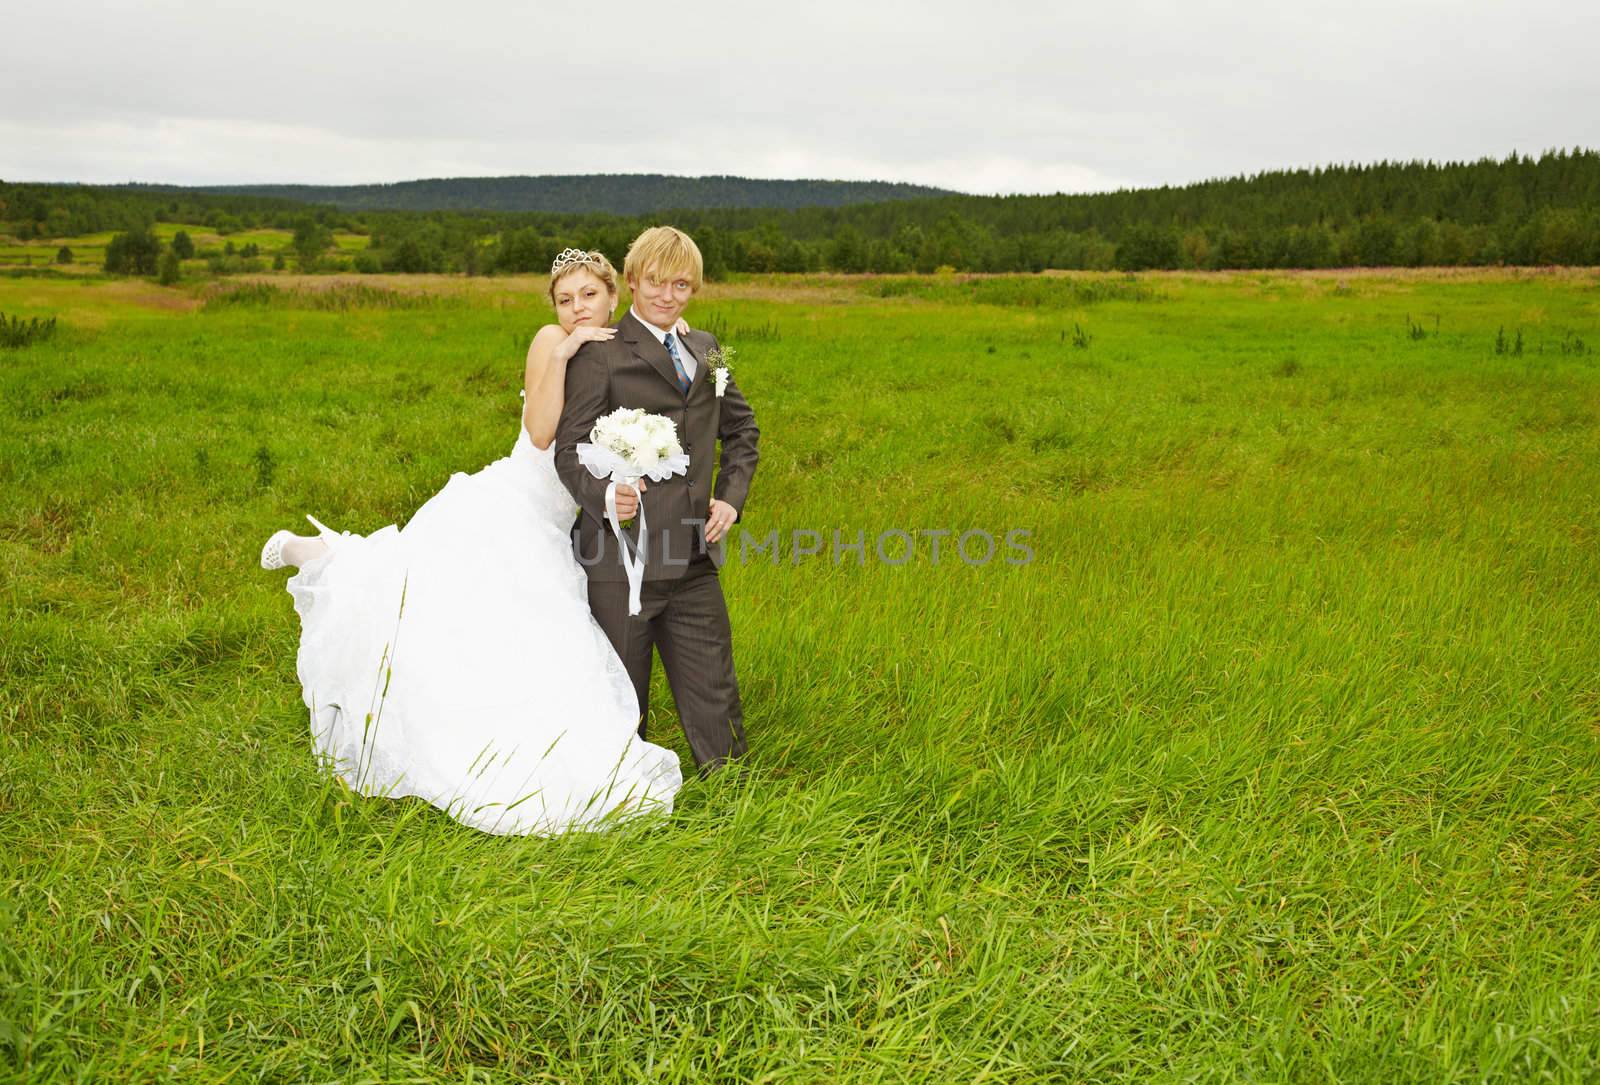 Bride and groom on nature in field by pzaxe